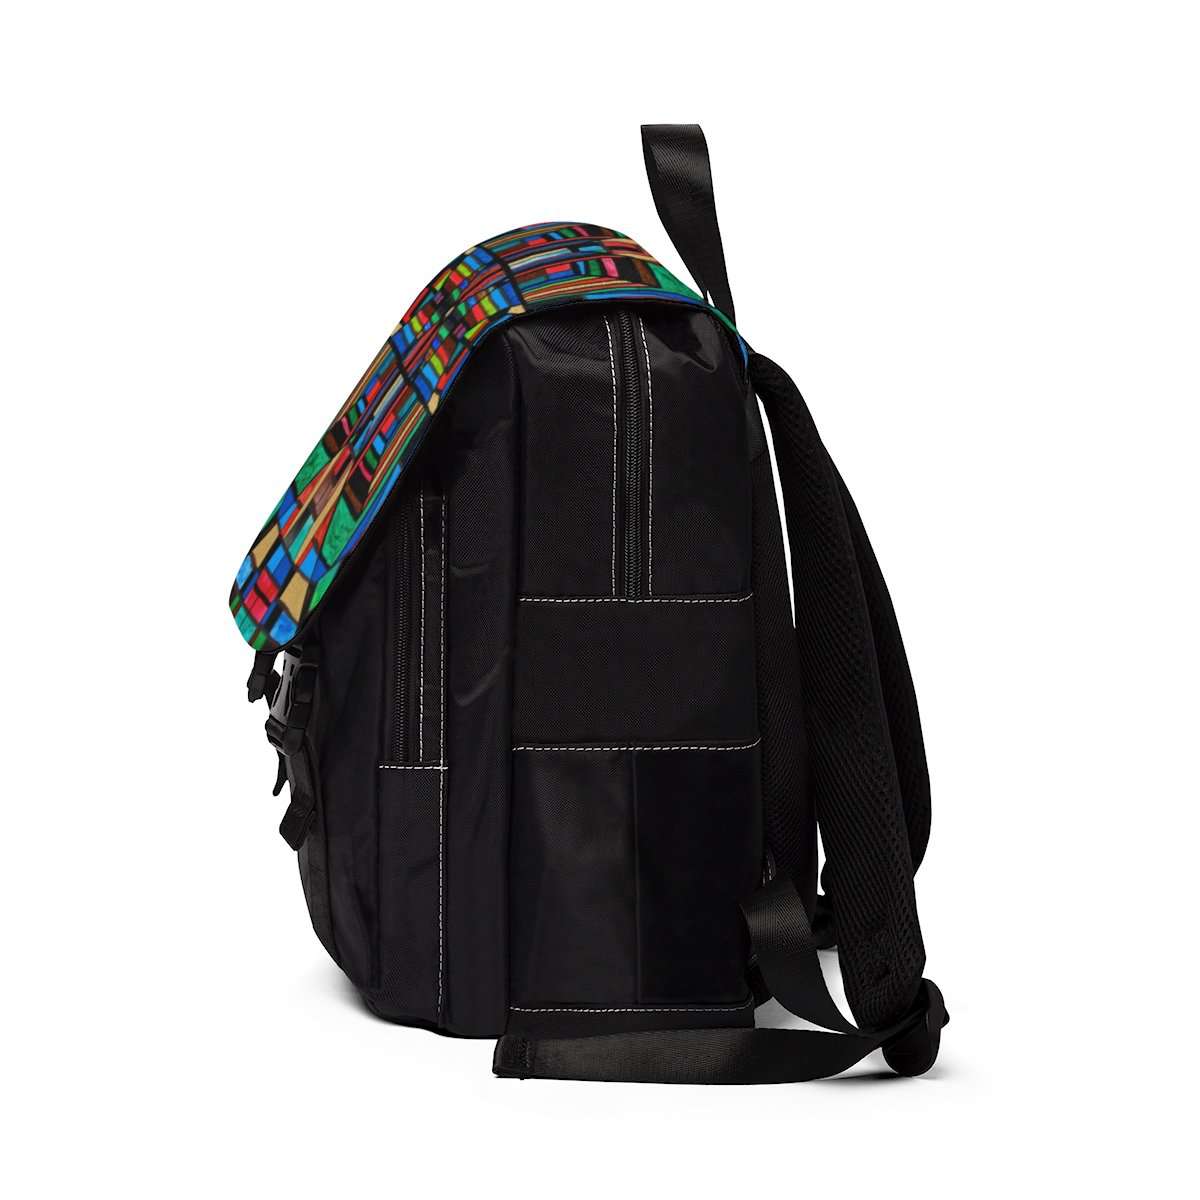 we-offer-the-best-prices-on-the-best-of-organization-unisex-casual-shoulder-backpack-online_2.jpg